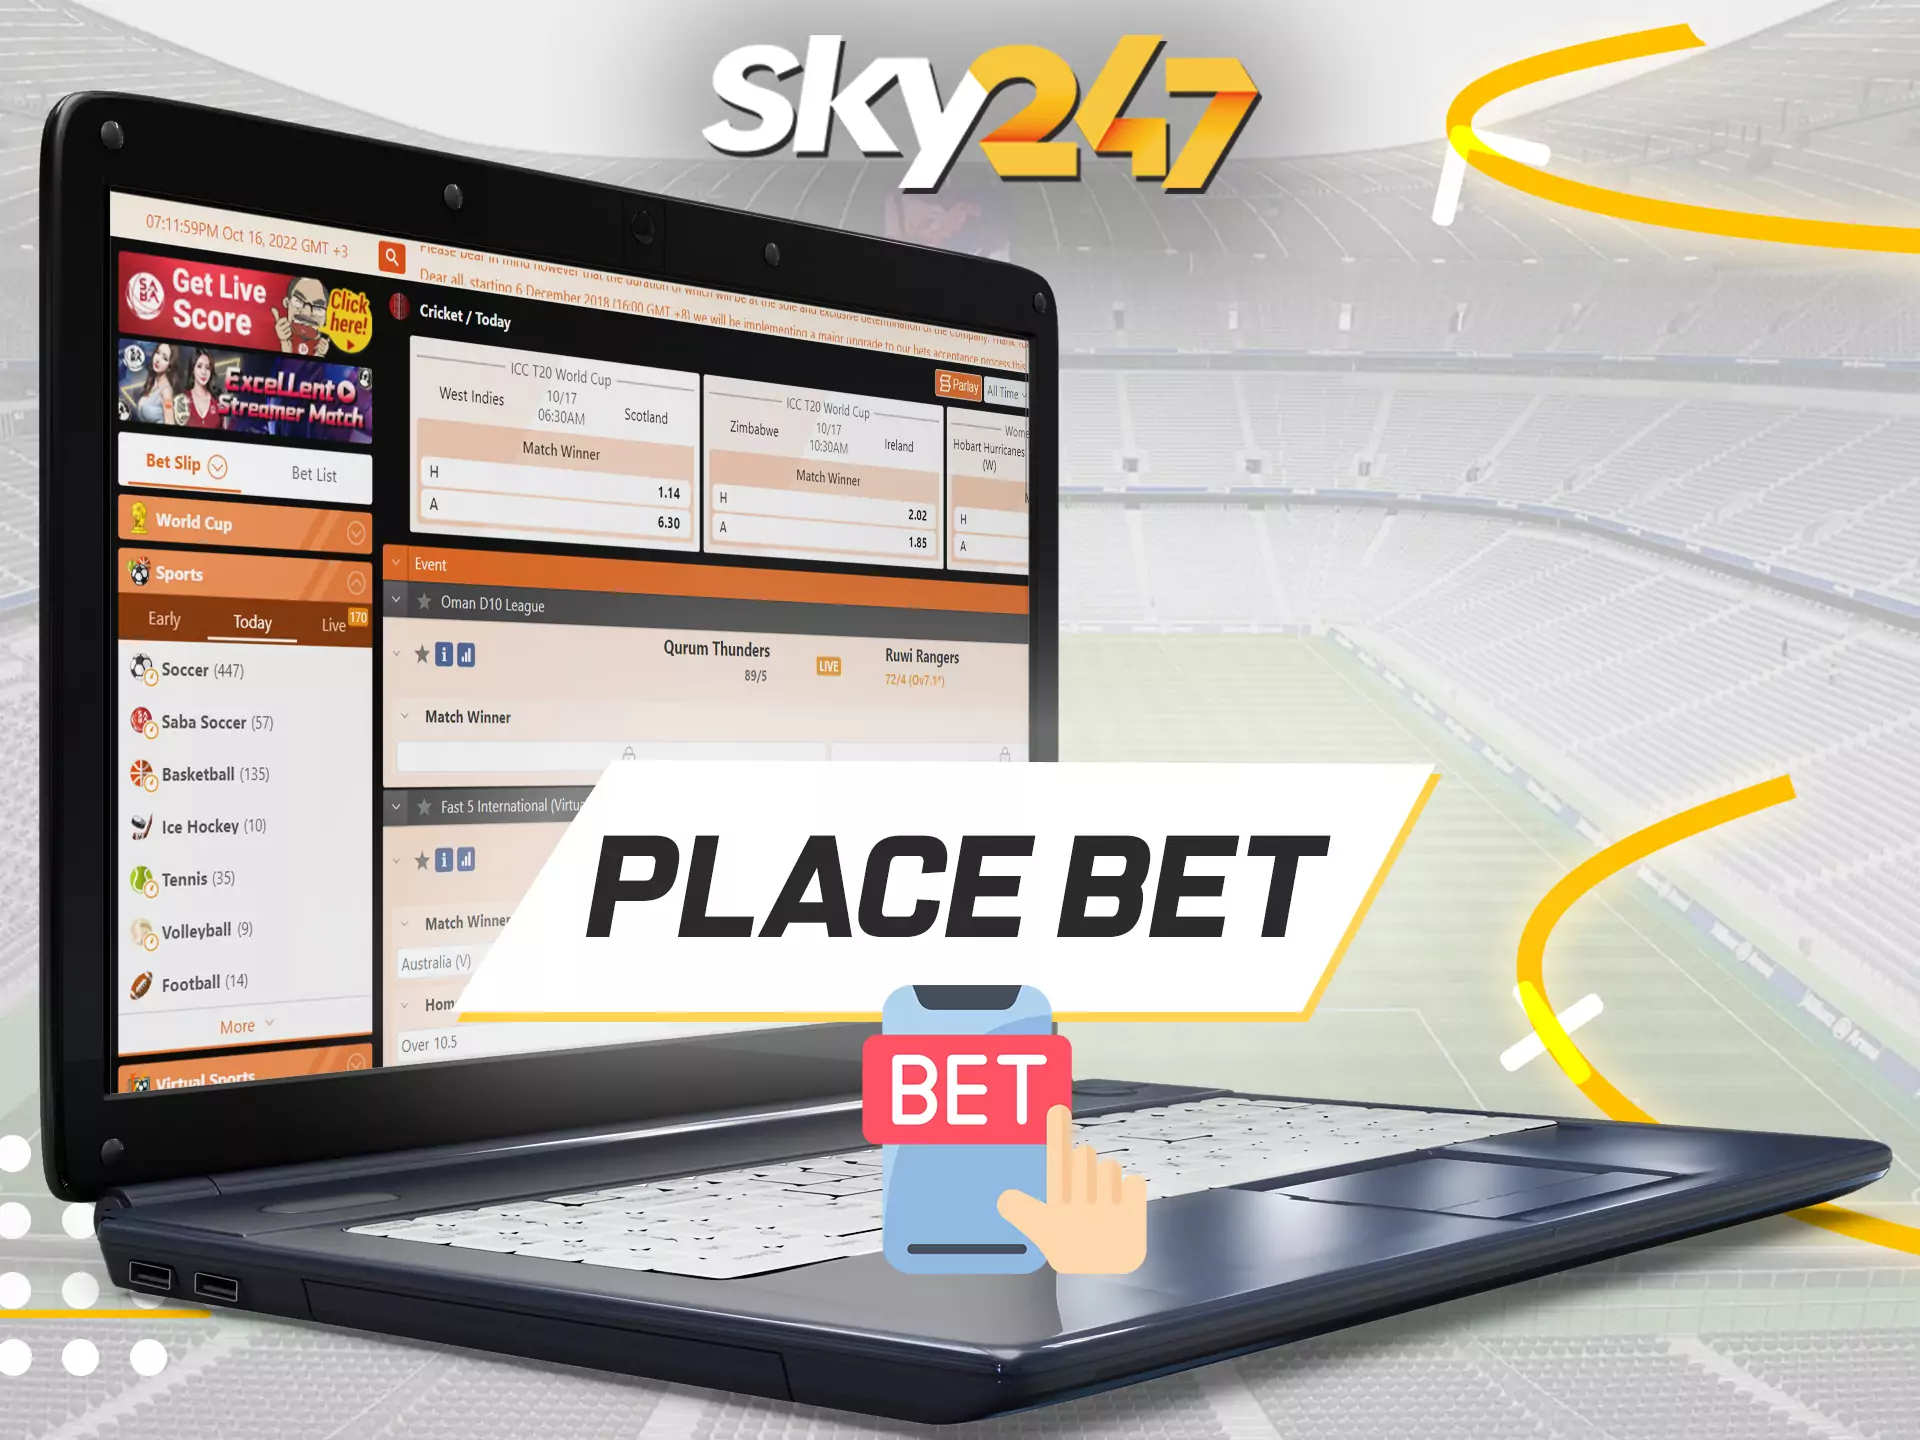 Visit the Sky247 betting section, choose a match and place a bet according to your prediction.